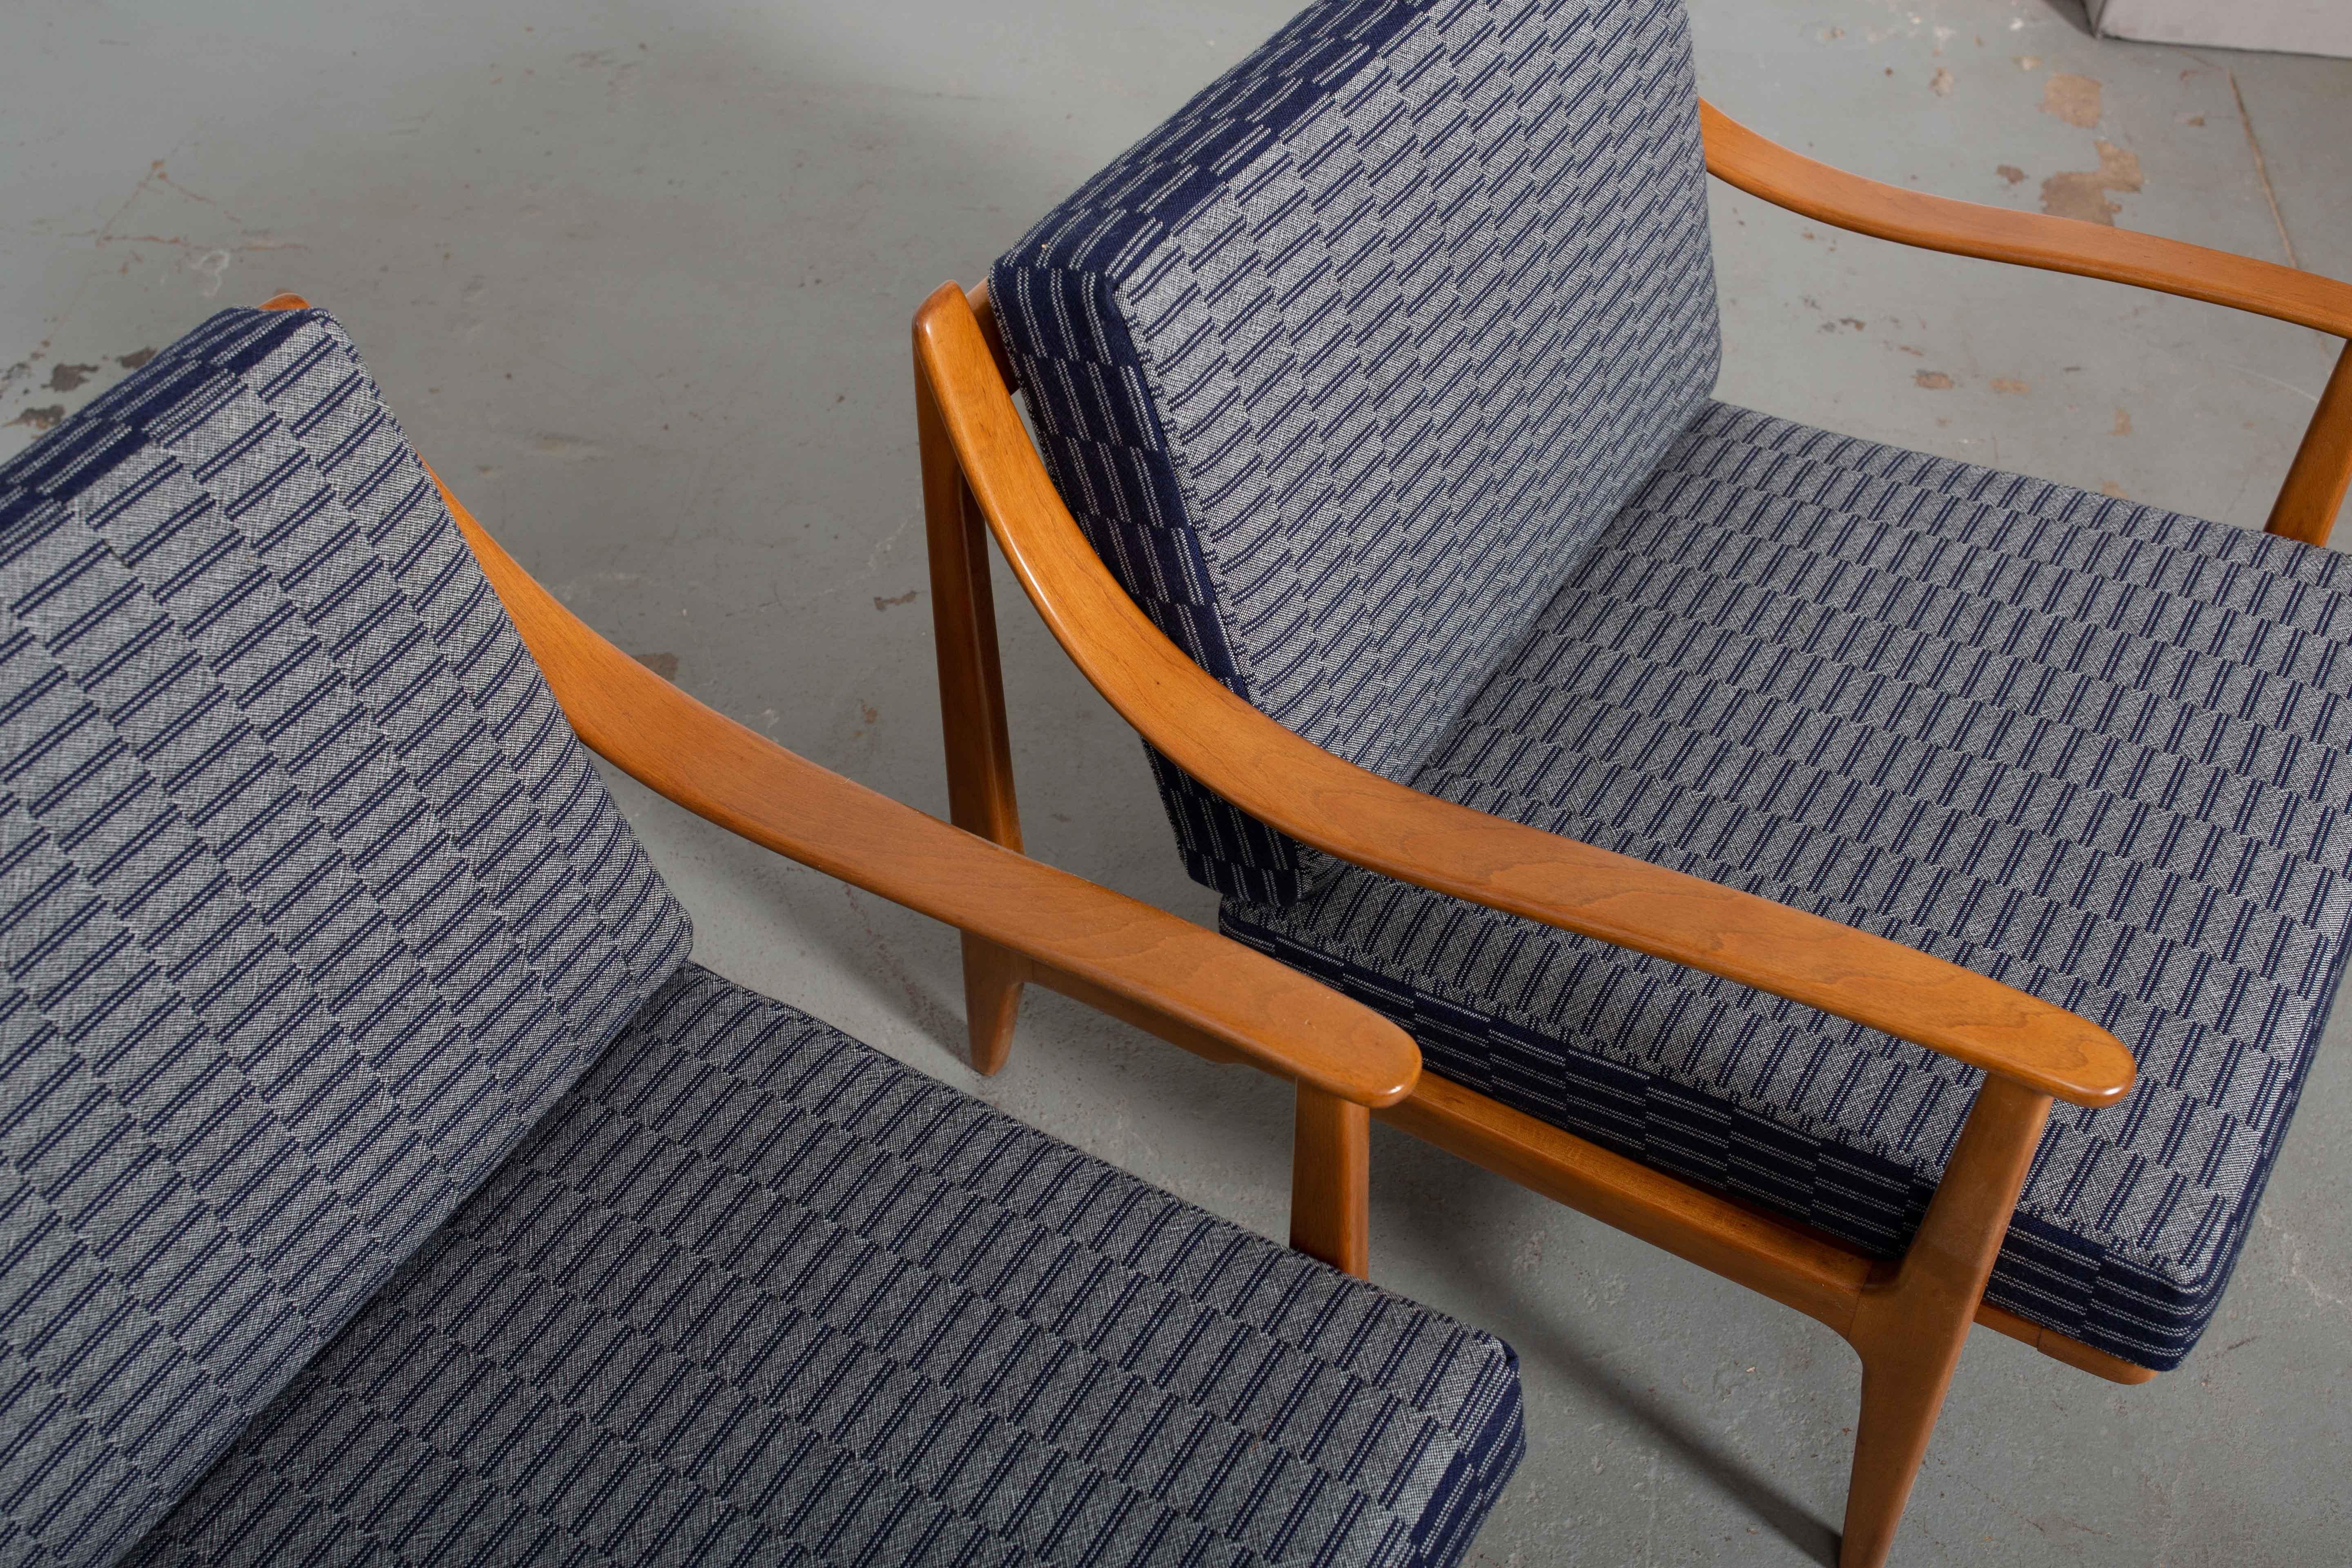 Newly restored pair of Danish modern lounge chairs with bentwood arms and tapered legs. Textile is a navy and white Scottish wool pattern designed by Eleanor Pritchard (England). Unique construction and beautiful curves!
21.25